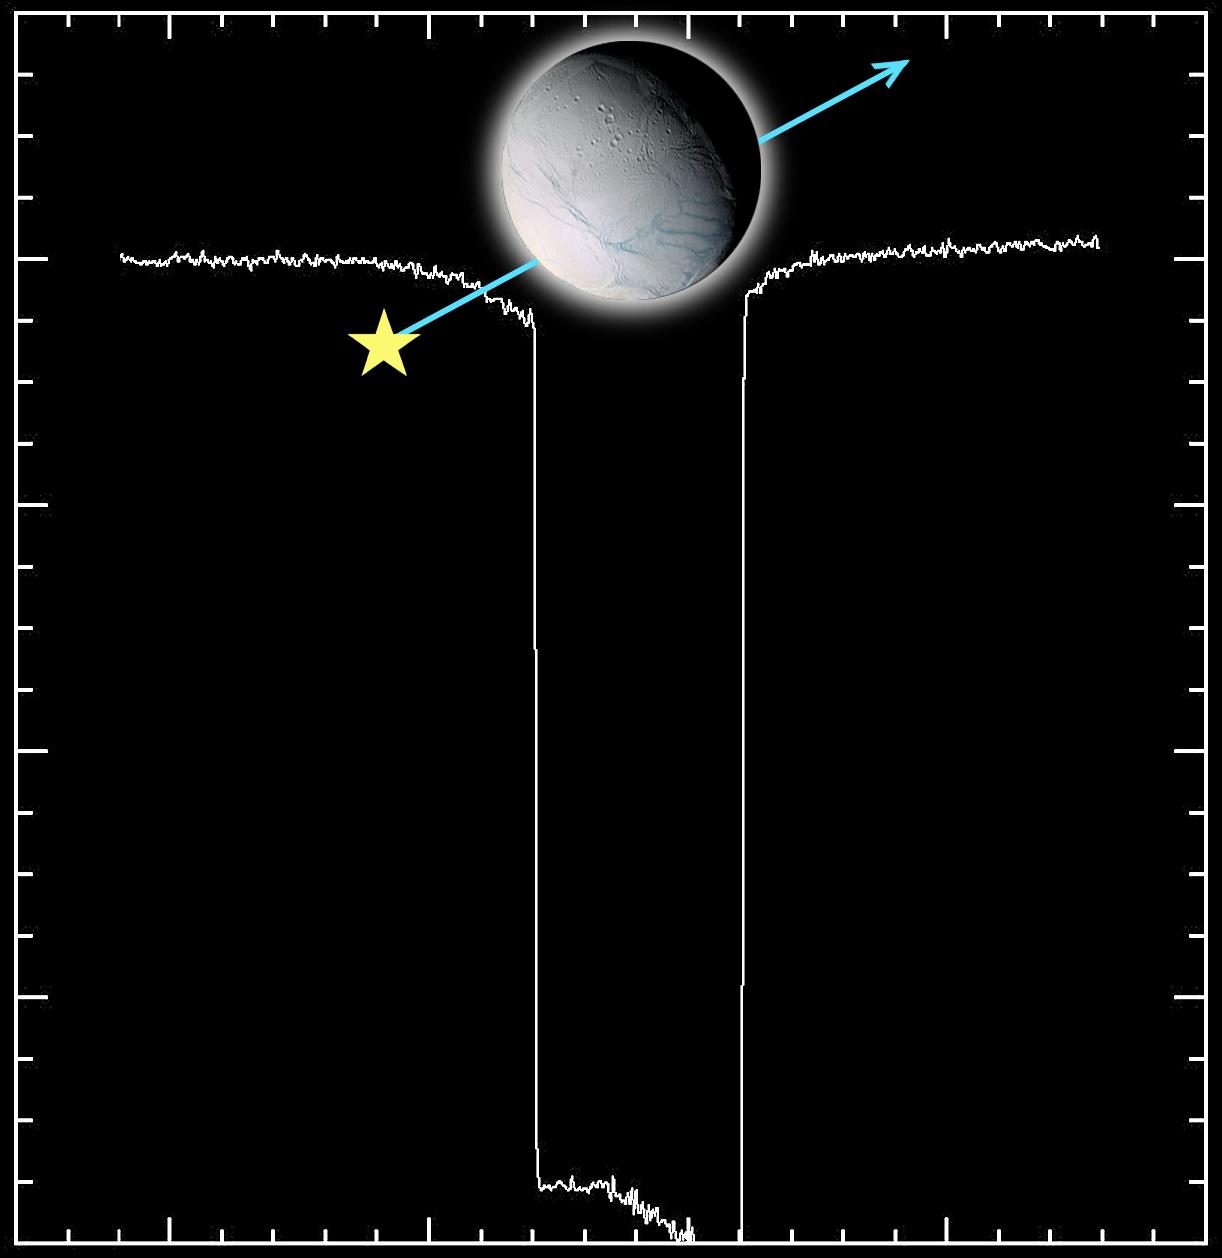 This graphic shows the effects on Enceladus's atmosphere as the icy moon crossed in front of the star Gamma Orionis. 